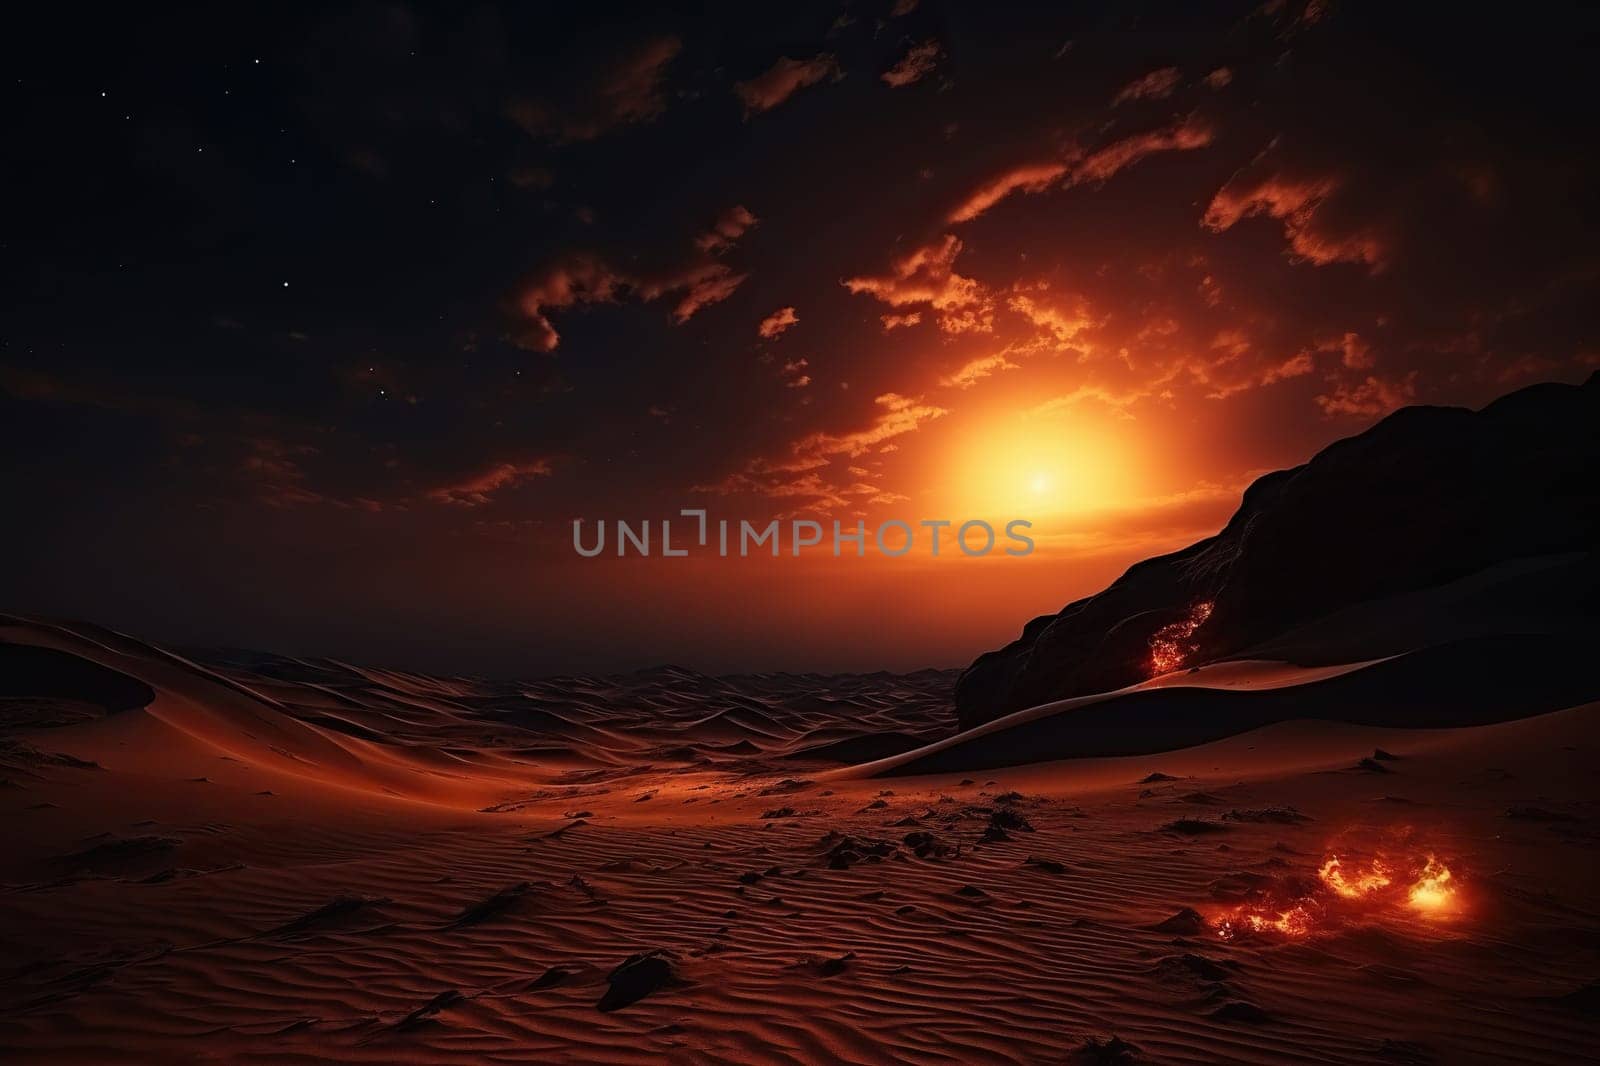 Desert landscape in the rays of the setting sun with fires on the sand.